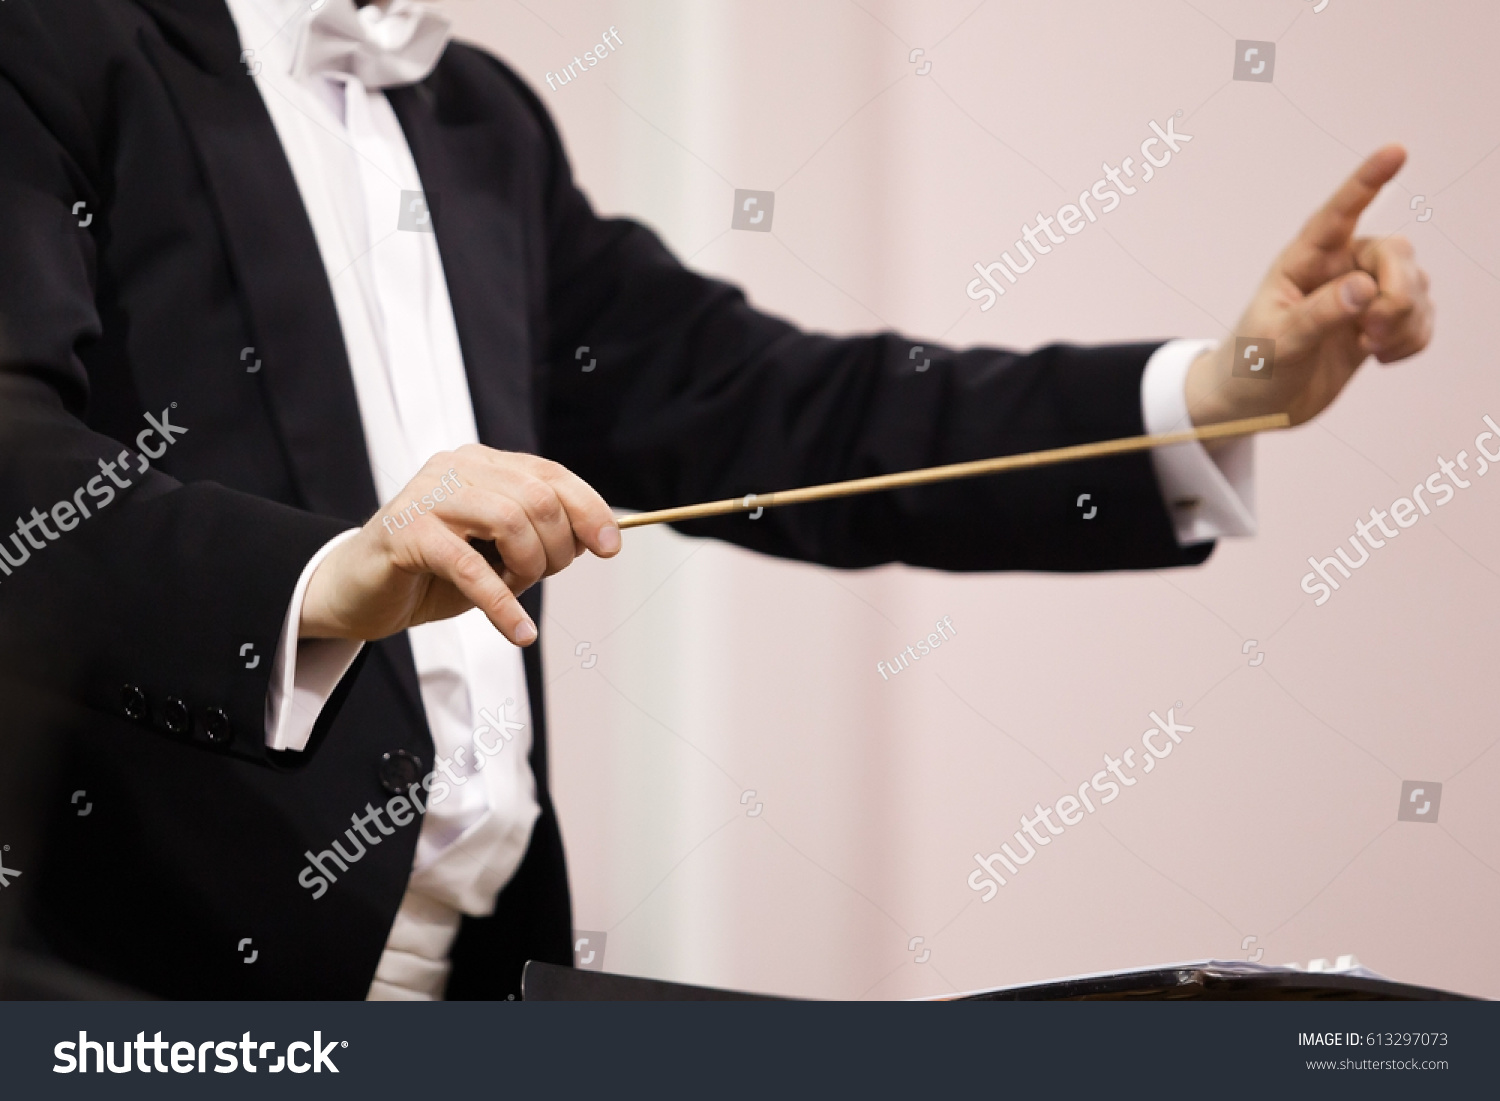  Hands of conductor  #613297073